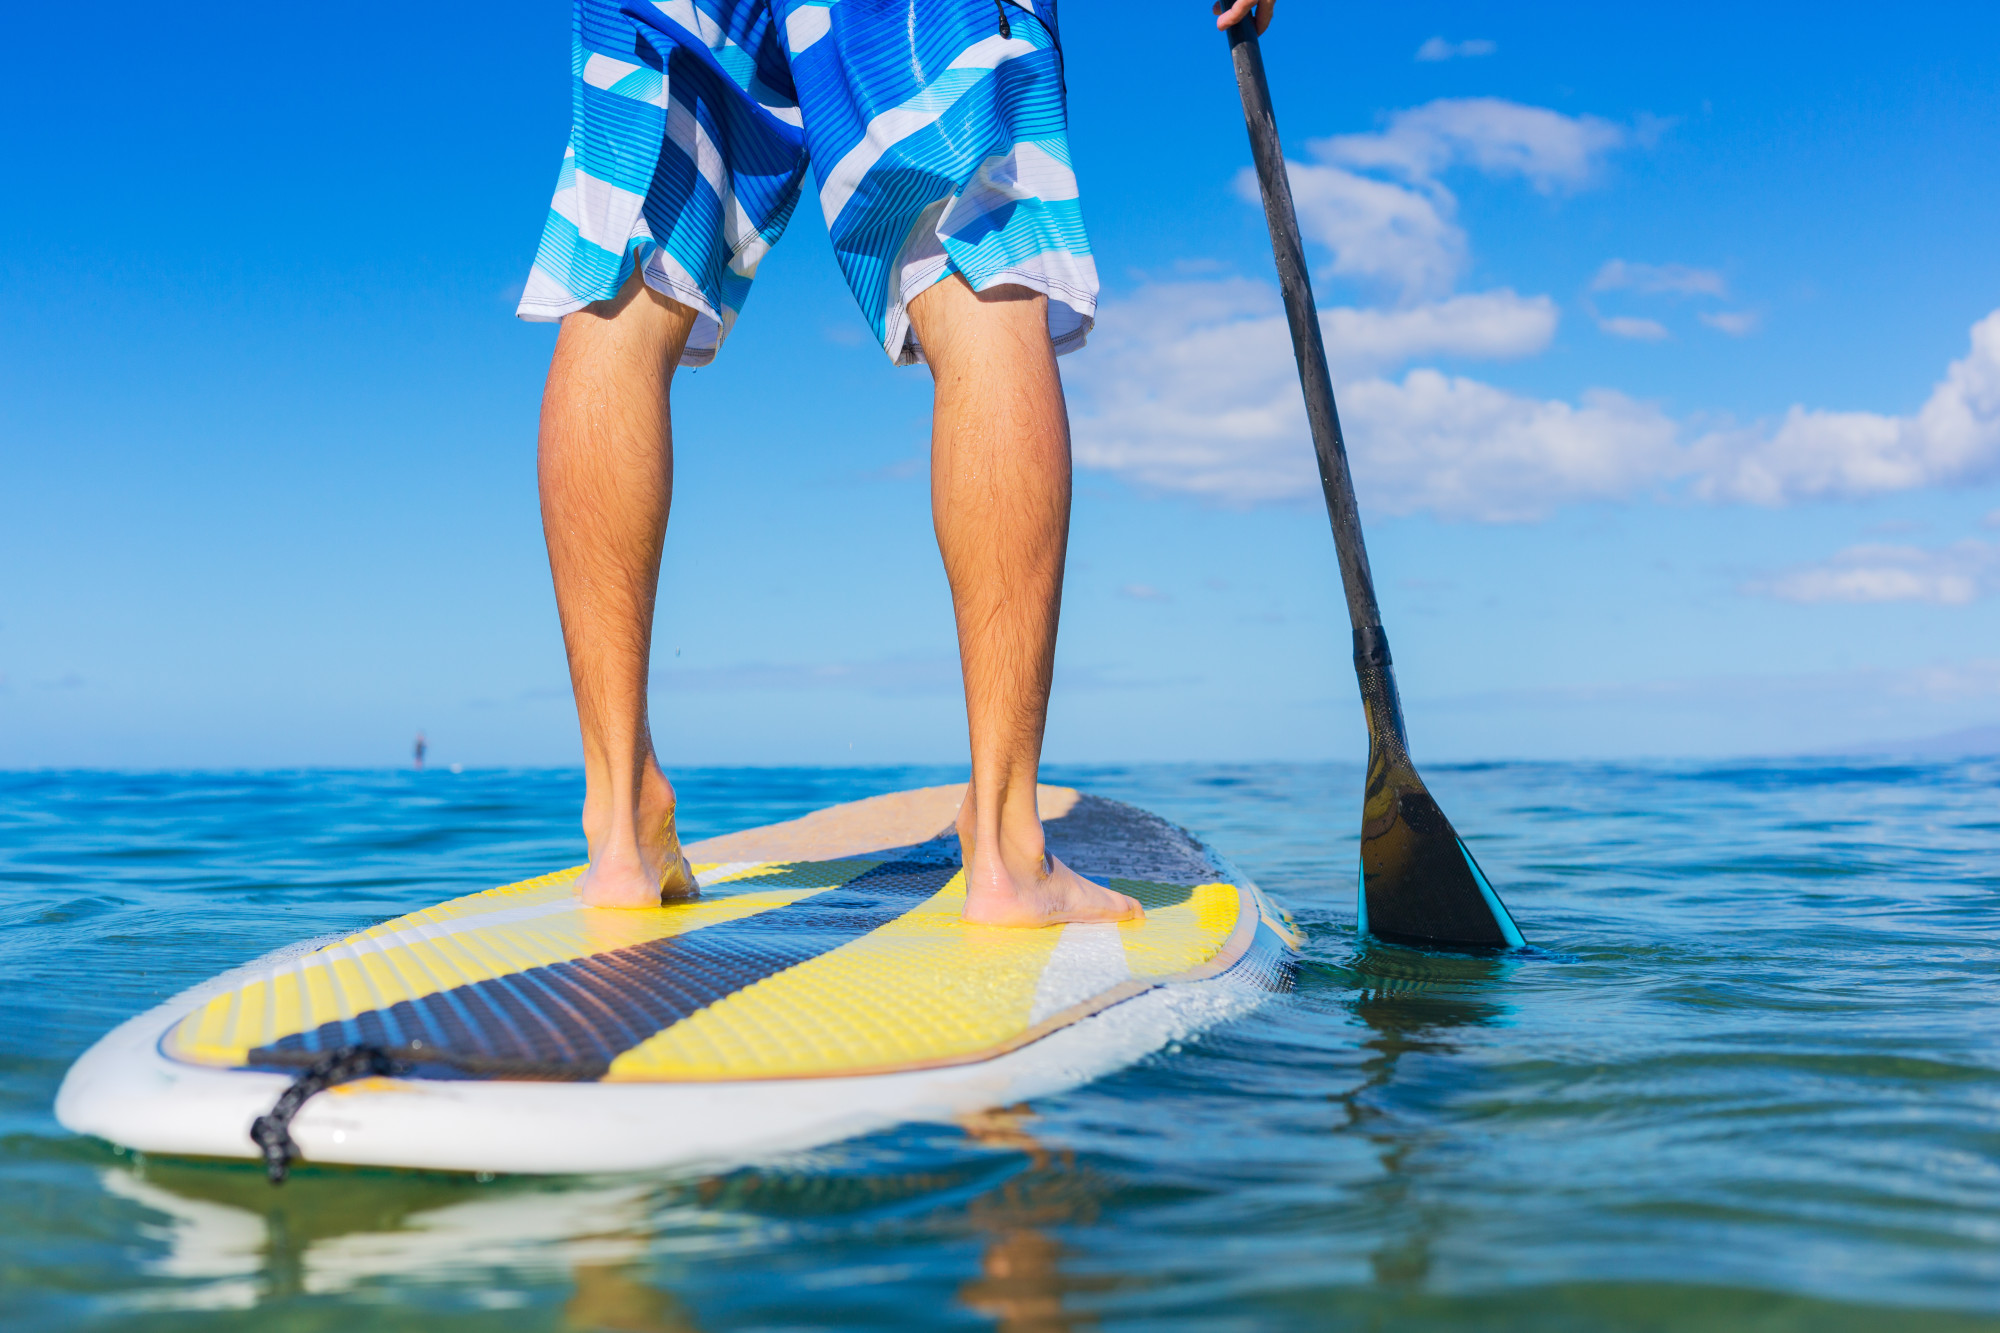 Paddle boarding tips - Man standing on paddle board with only waist down visible